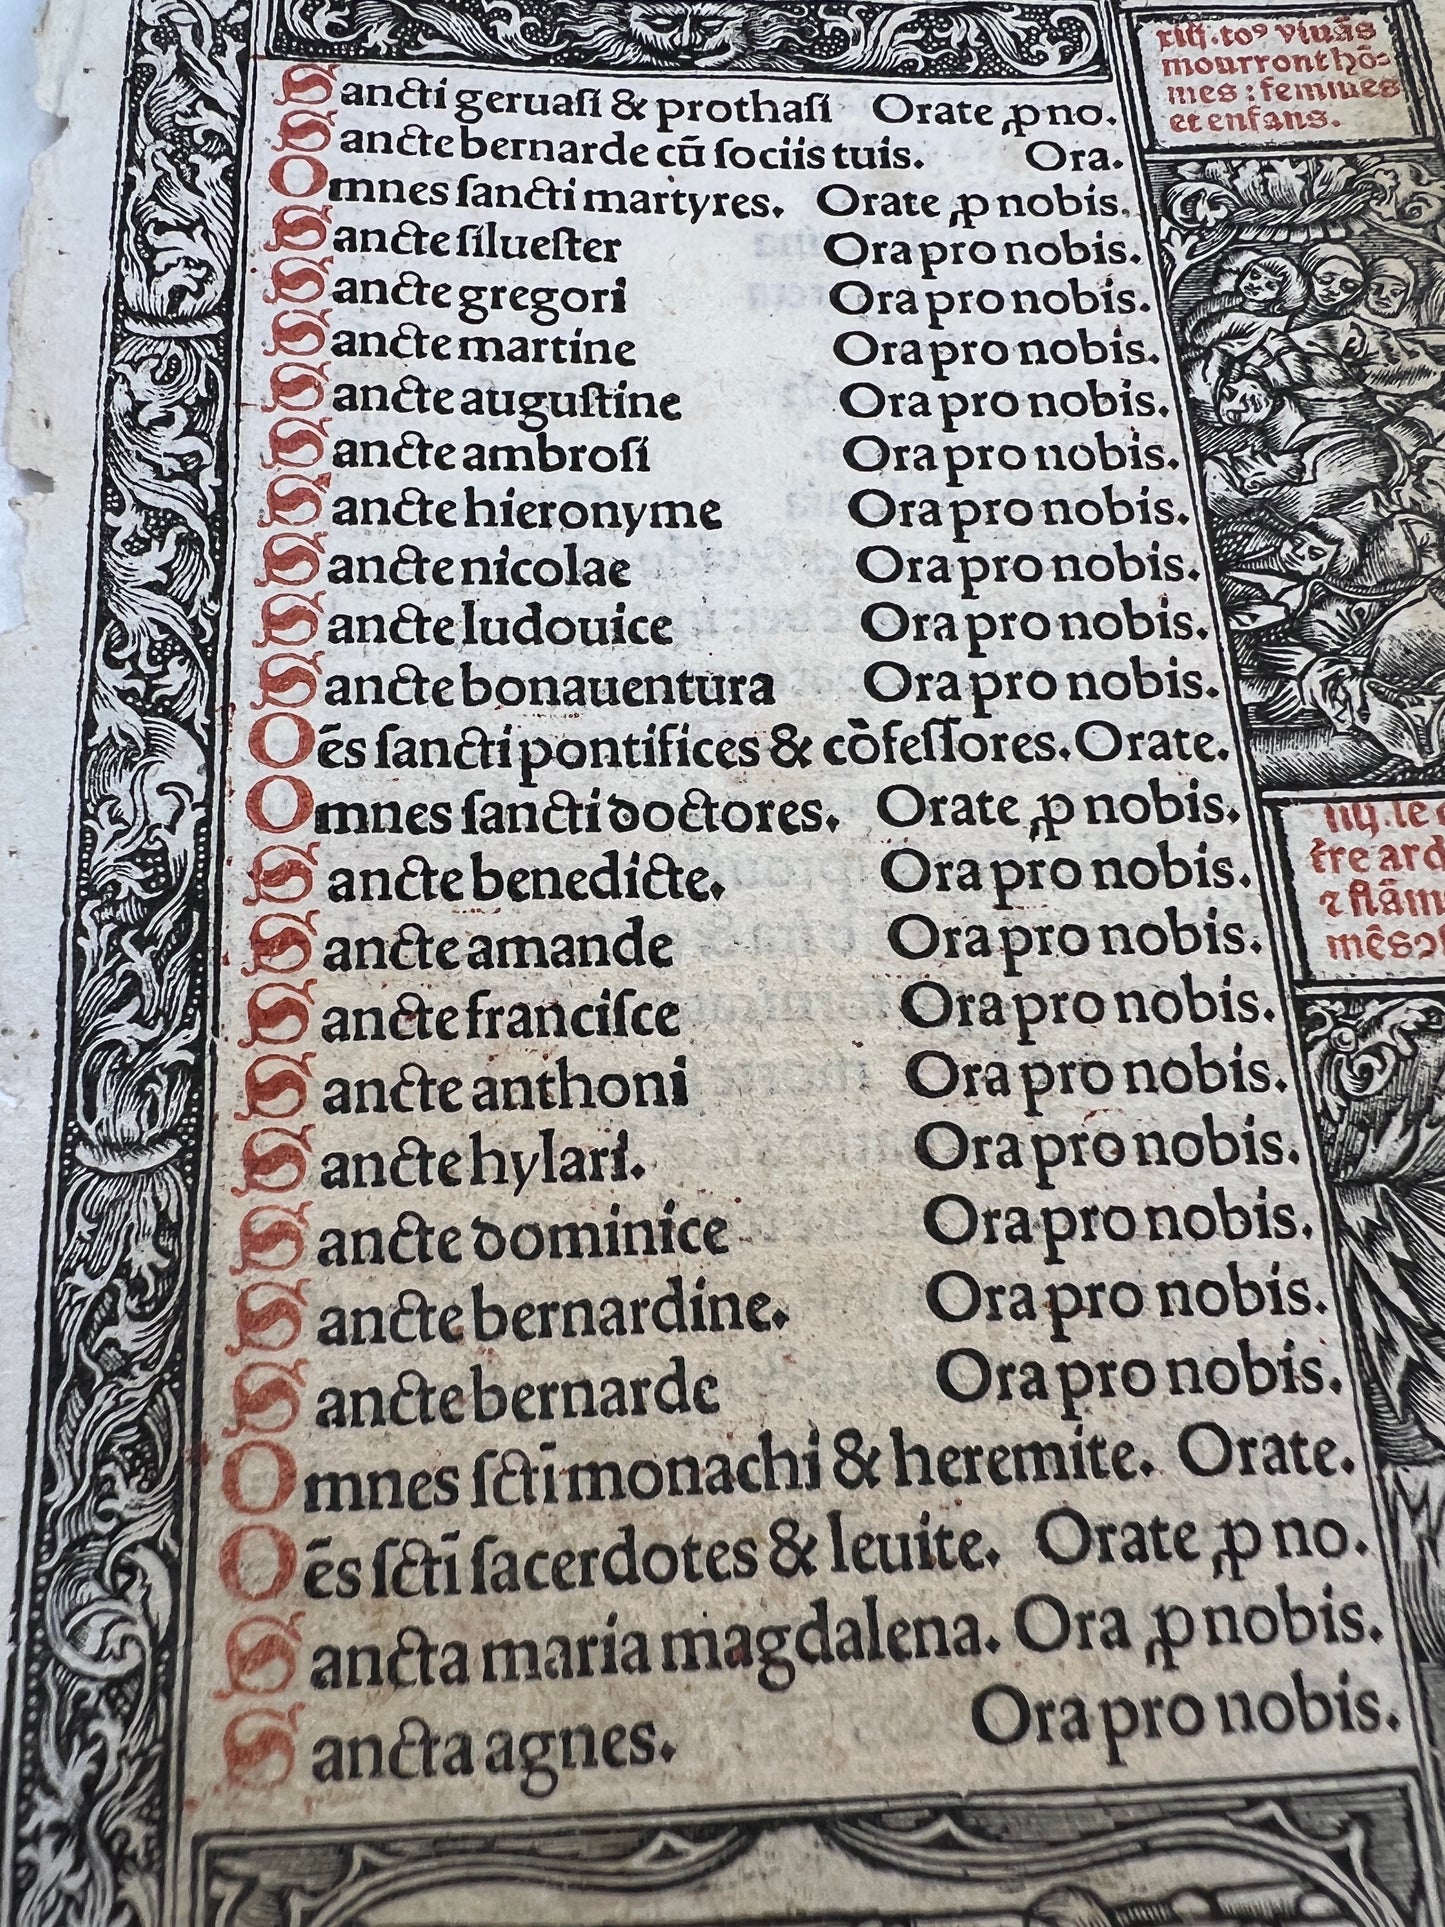 c1500s Leaf from Printed Book of Hours with Metalcuts - Litany